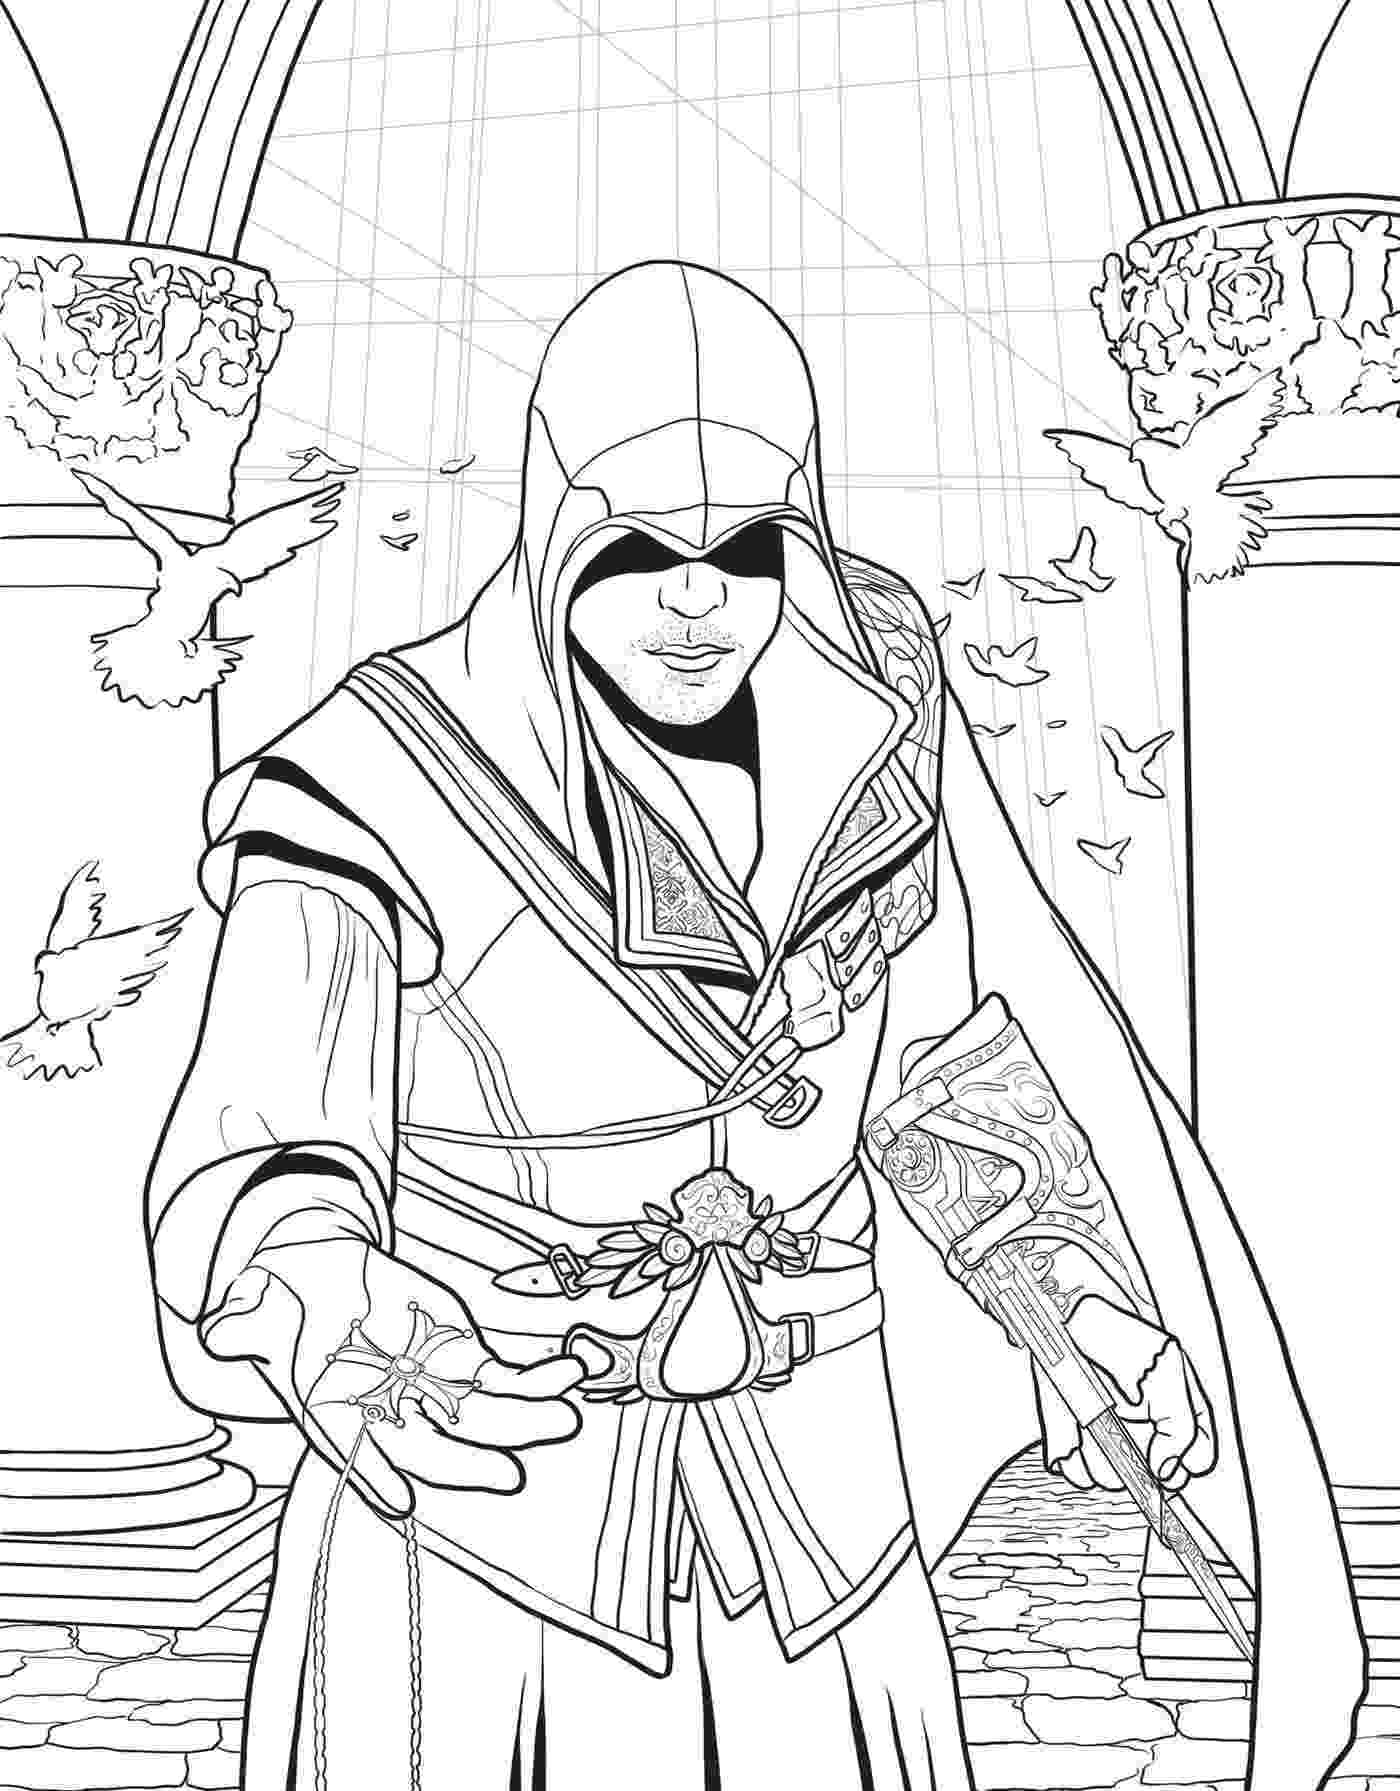 coloring page book assassins creed the official colouring book paperback coloring page book 